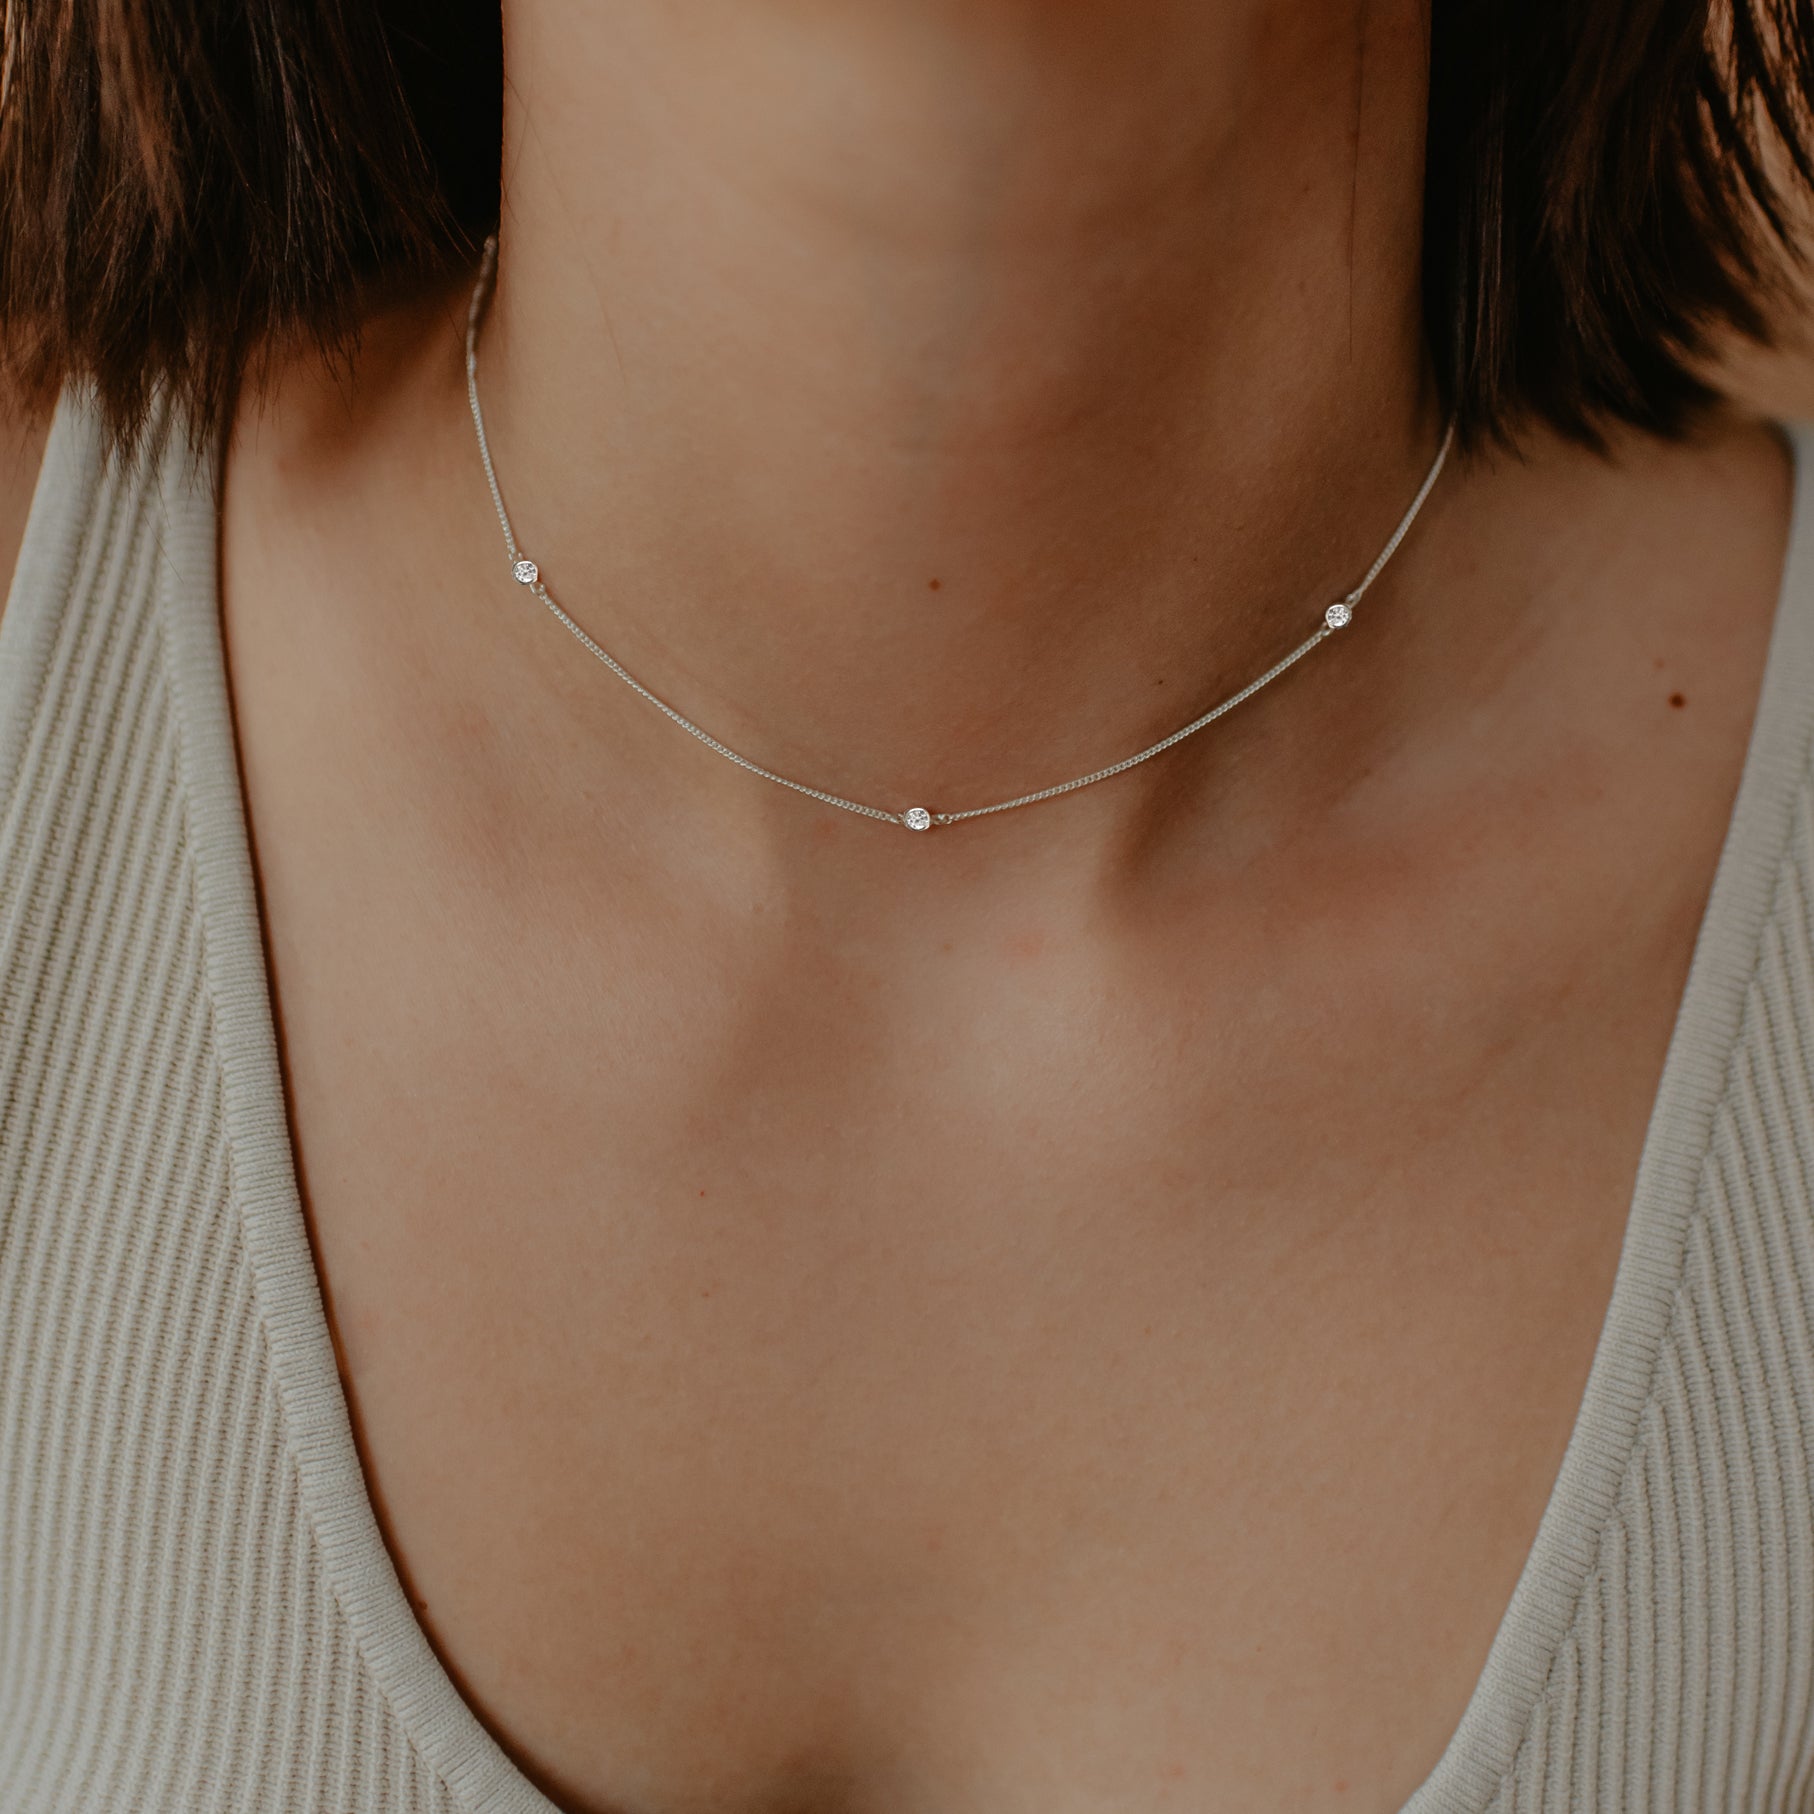 Tiny Love Necklace - Cubic Zirconia & Silver - SO PRETTY CARA COTTER